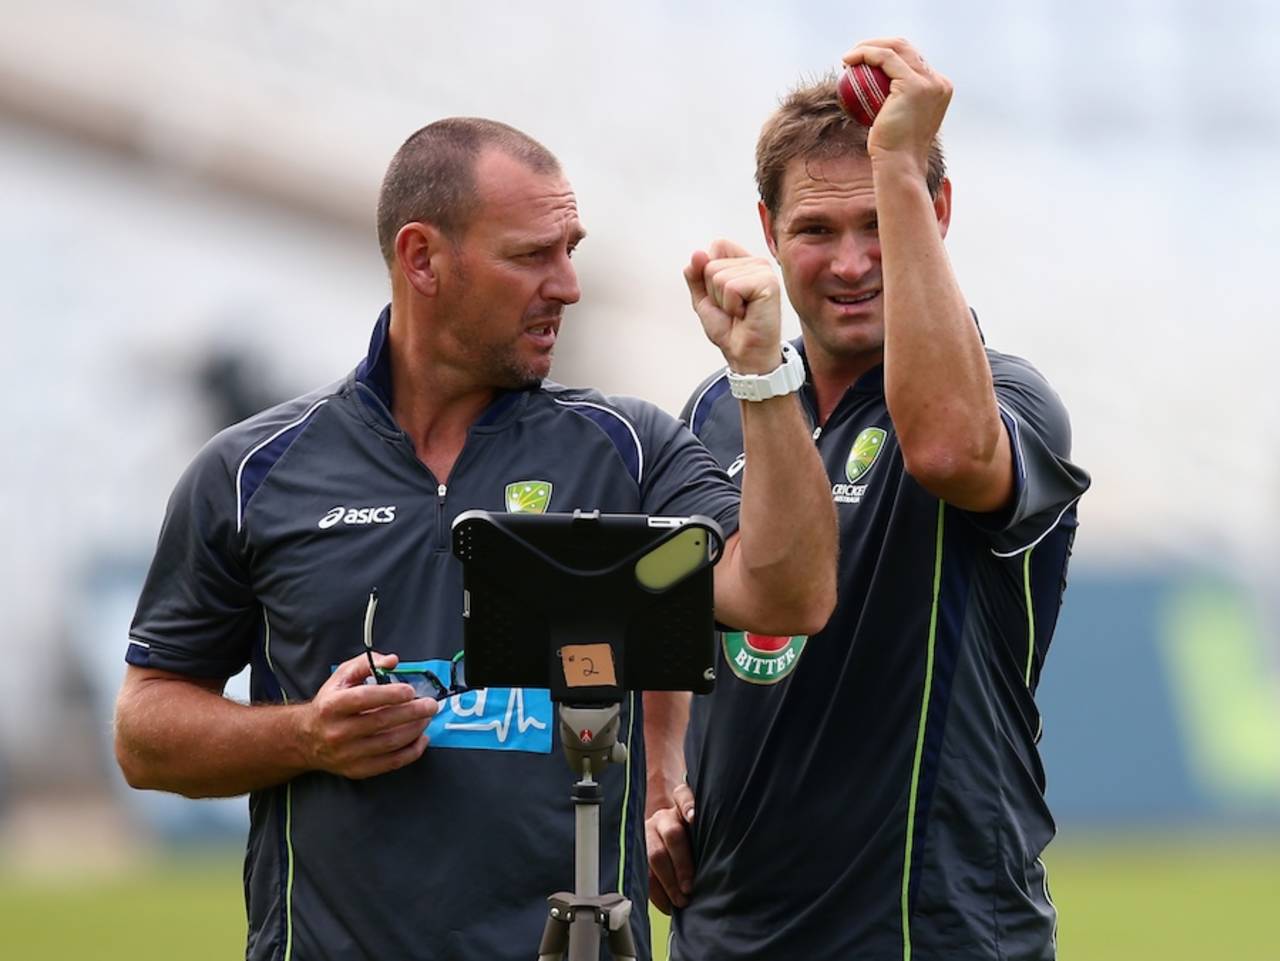 Allister de Winter (left) works with Ryan Harris on the Ashes tour of England in 2013&nbsp;&nbsp;&bull;&nbsp;&nbsp;Getty Images